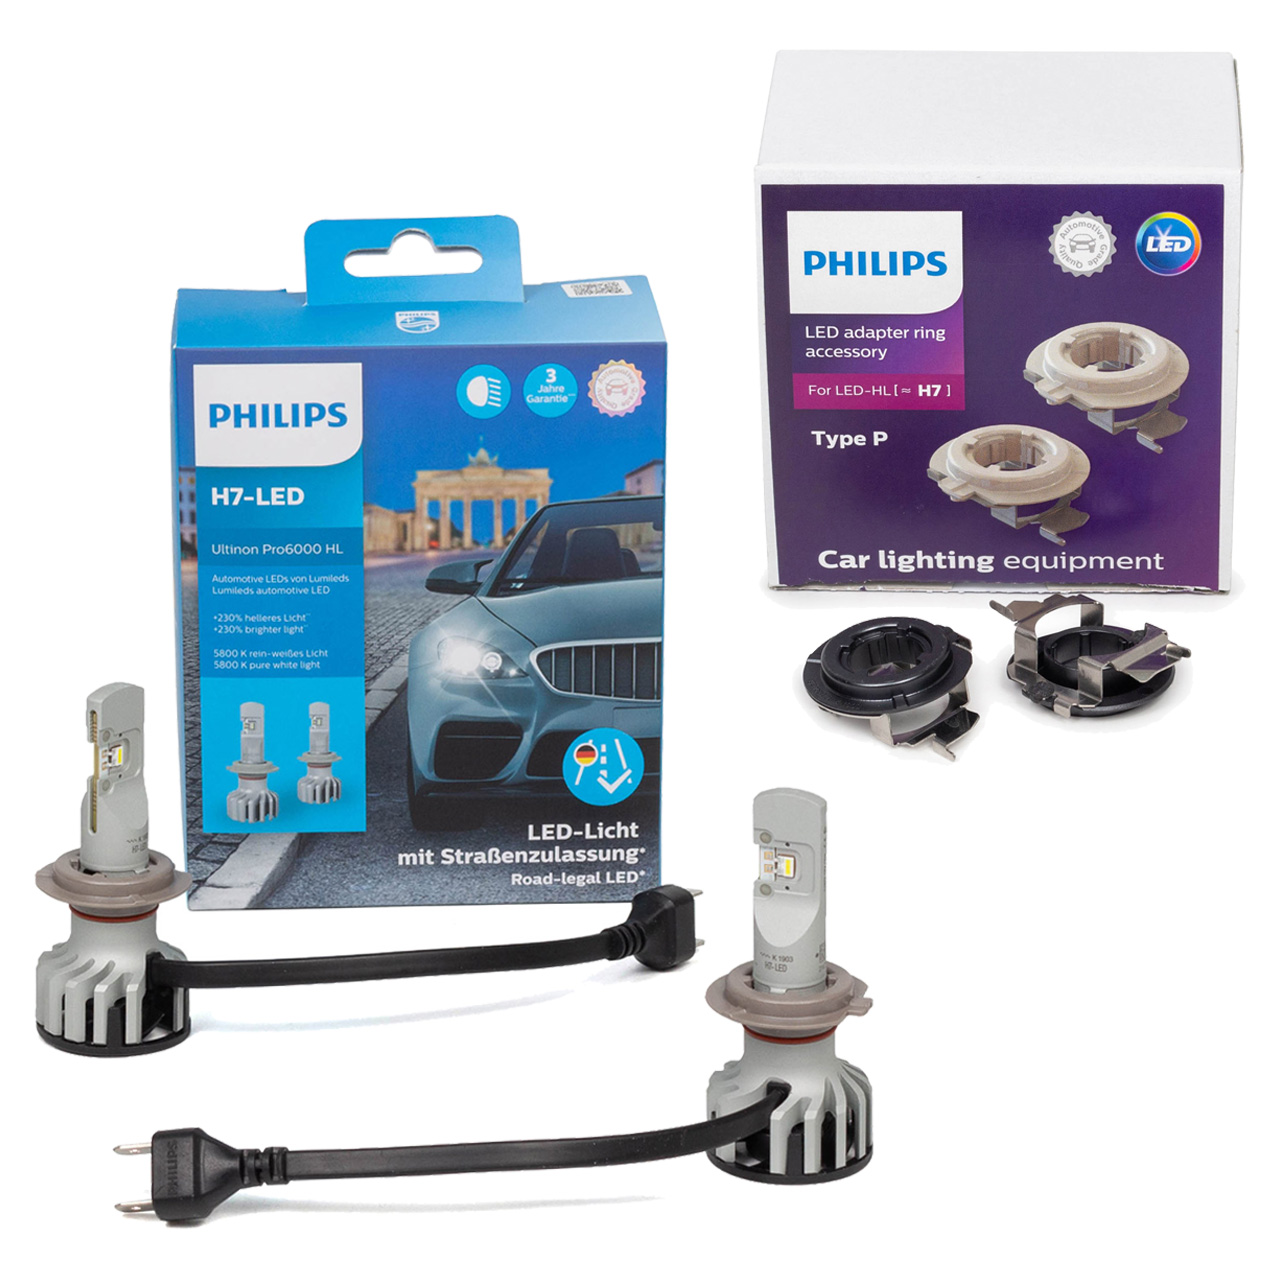 2x PHILIPS Ultinon Pro6000 H7 LED + Adapter BMW F20 MERCEDES W176 Astra J VW Golf 7 Polo 5